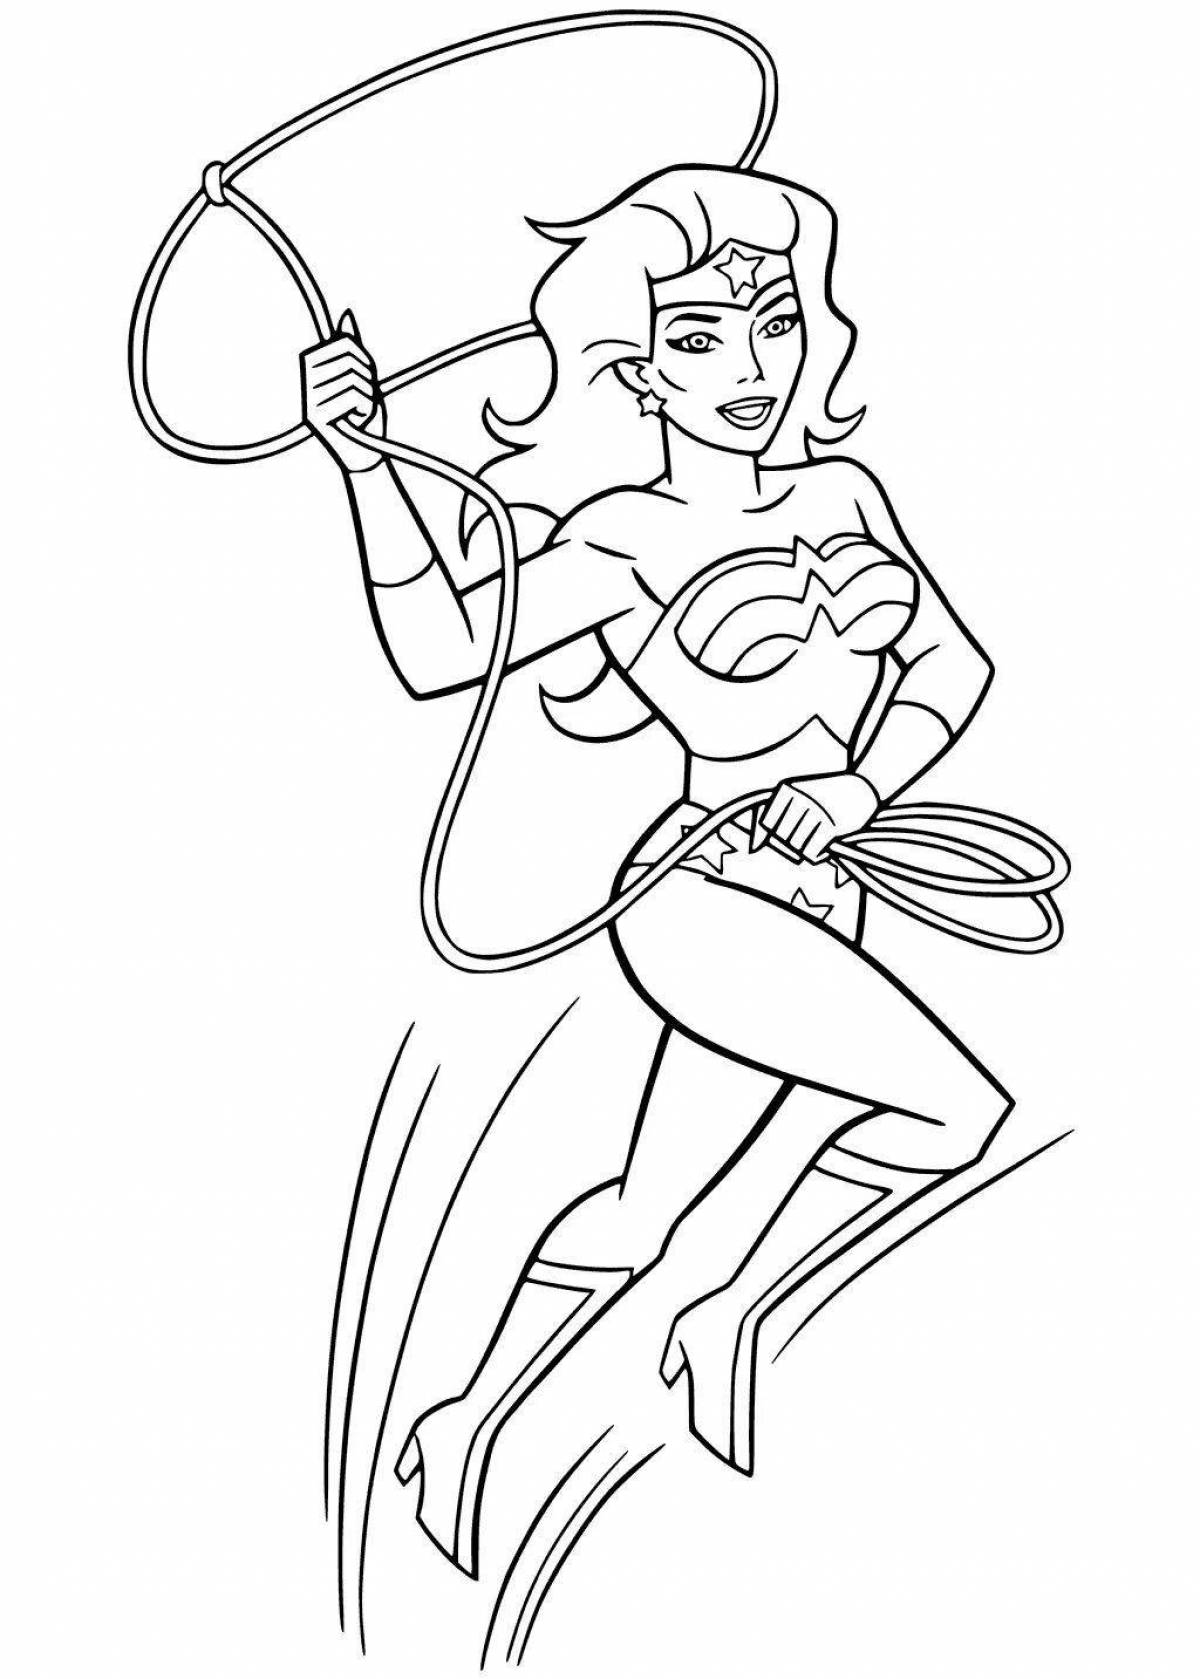 Colorfully drawn superwoman coloring page